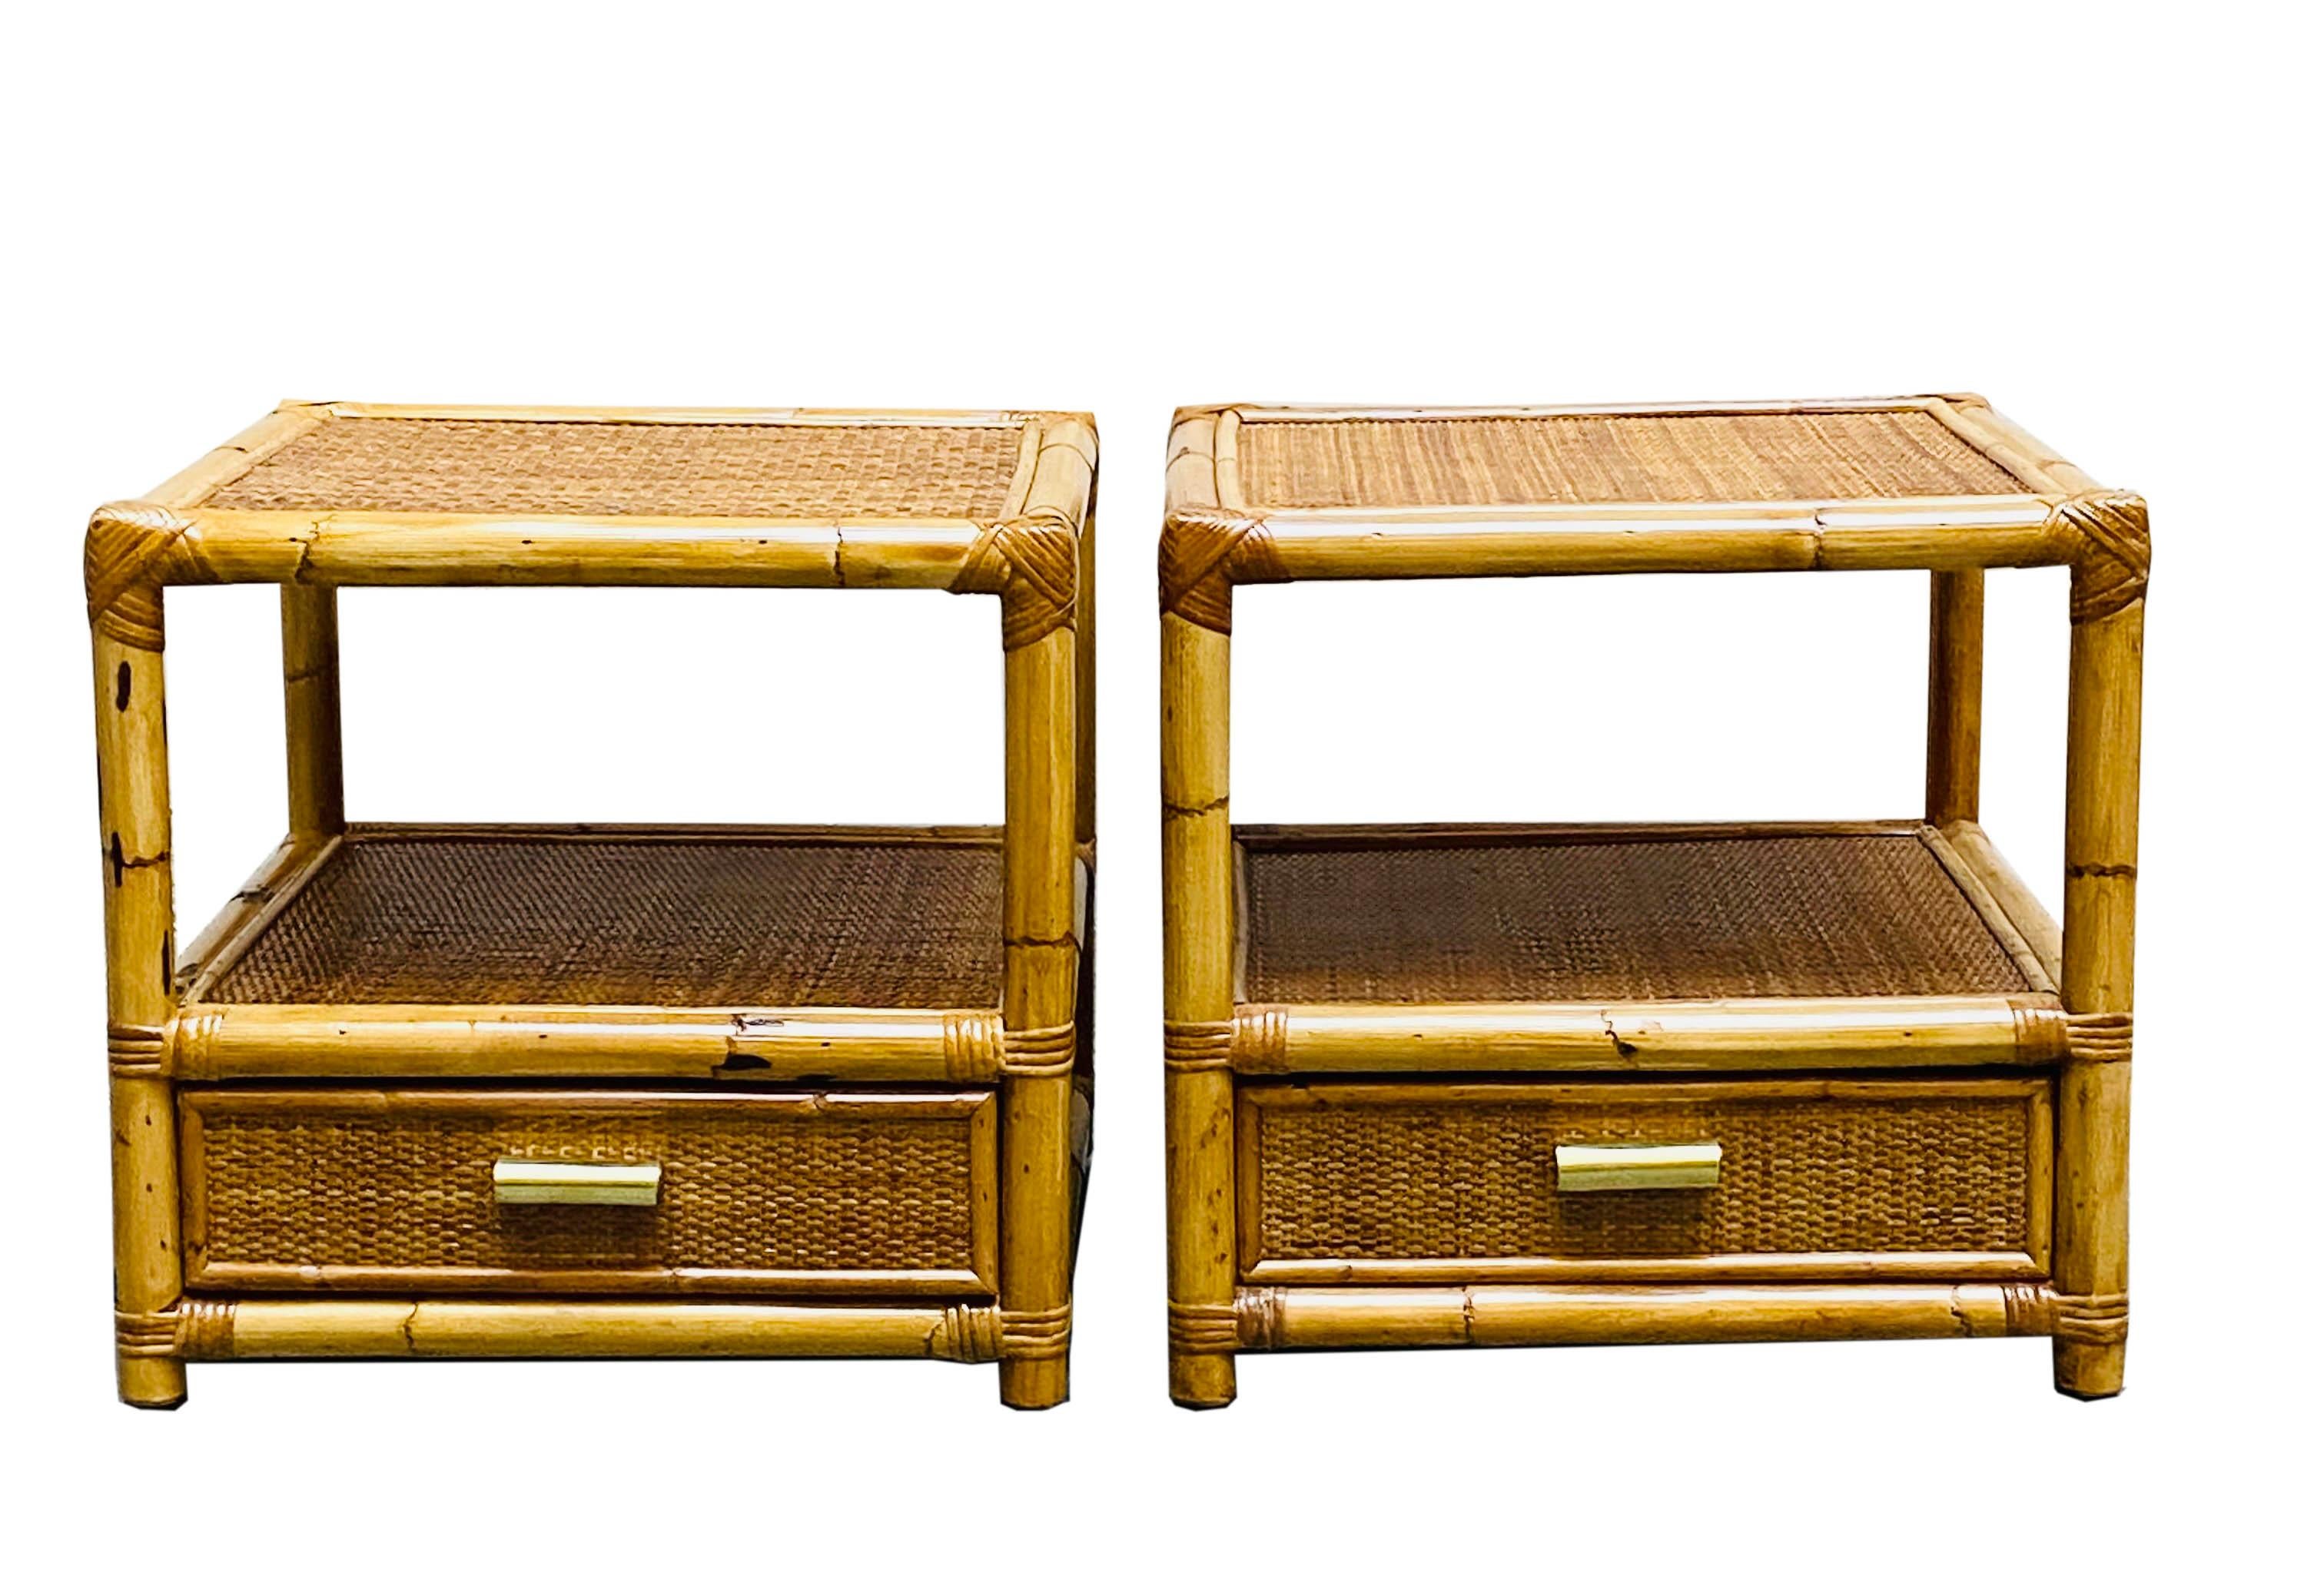 Beautiful pair of 1960s Italian bamboo and rattan bedside tables with brass handles and a drawer. The organic beauty of the woven materials is timeless and classic, making the bamboo and rattan furniture incredibly versatile. Italian Manufactory